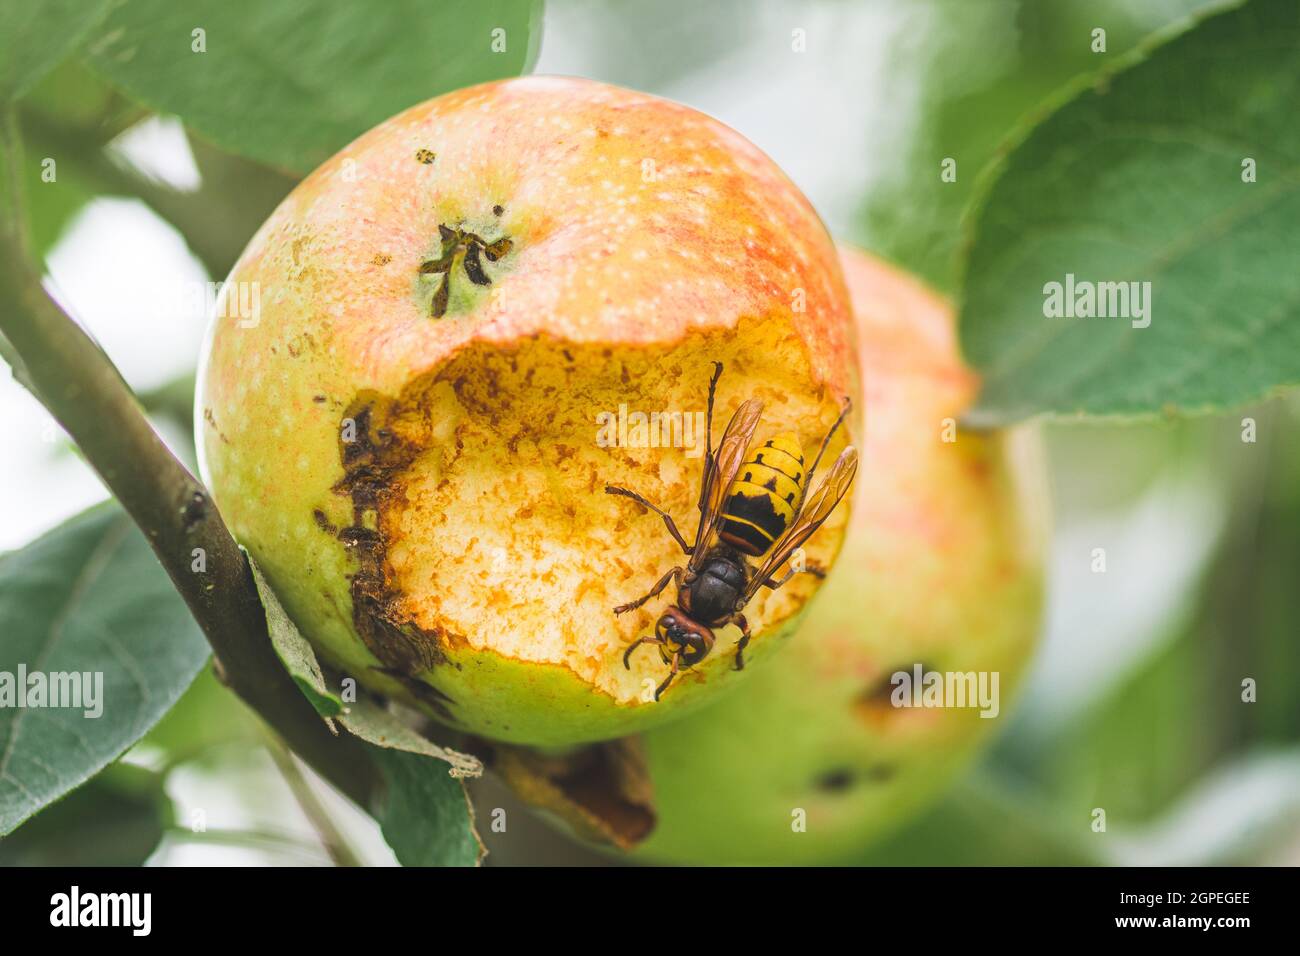 Giant European hornet wasp or Vespa crabro eating an apple hanging from a tree, close up Stock Photo